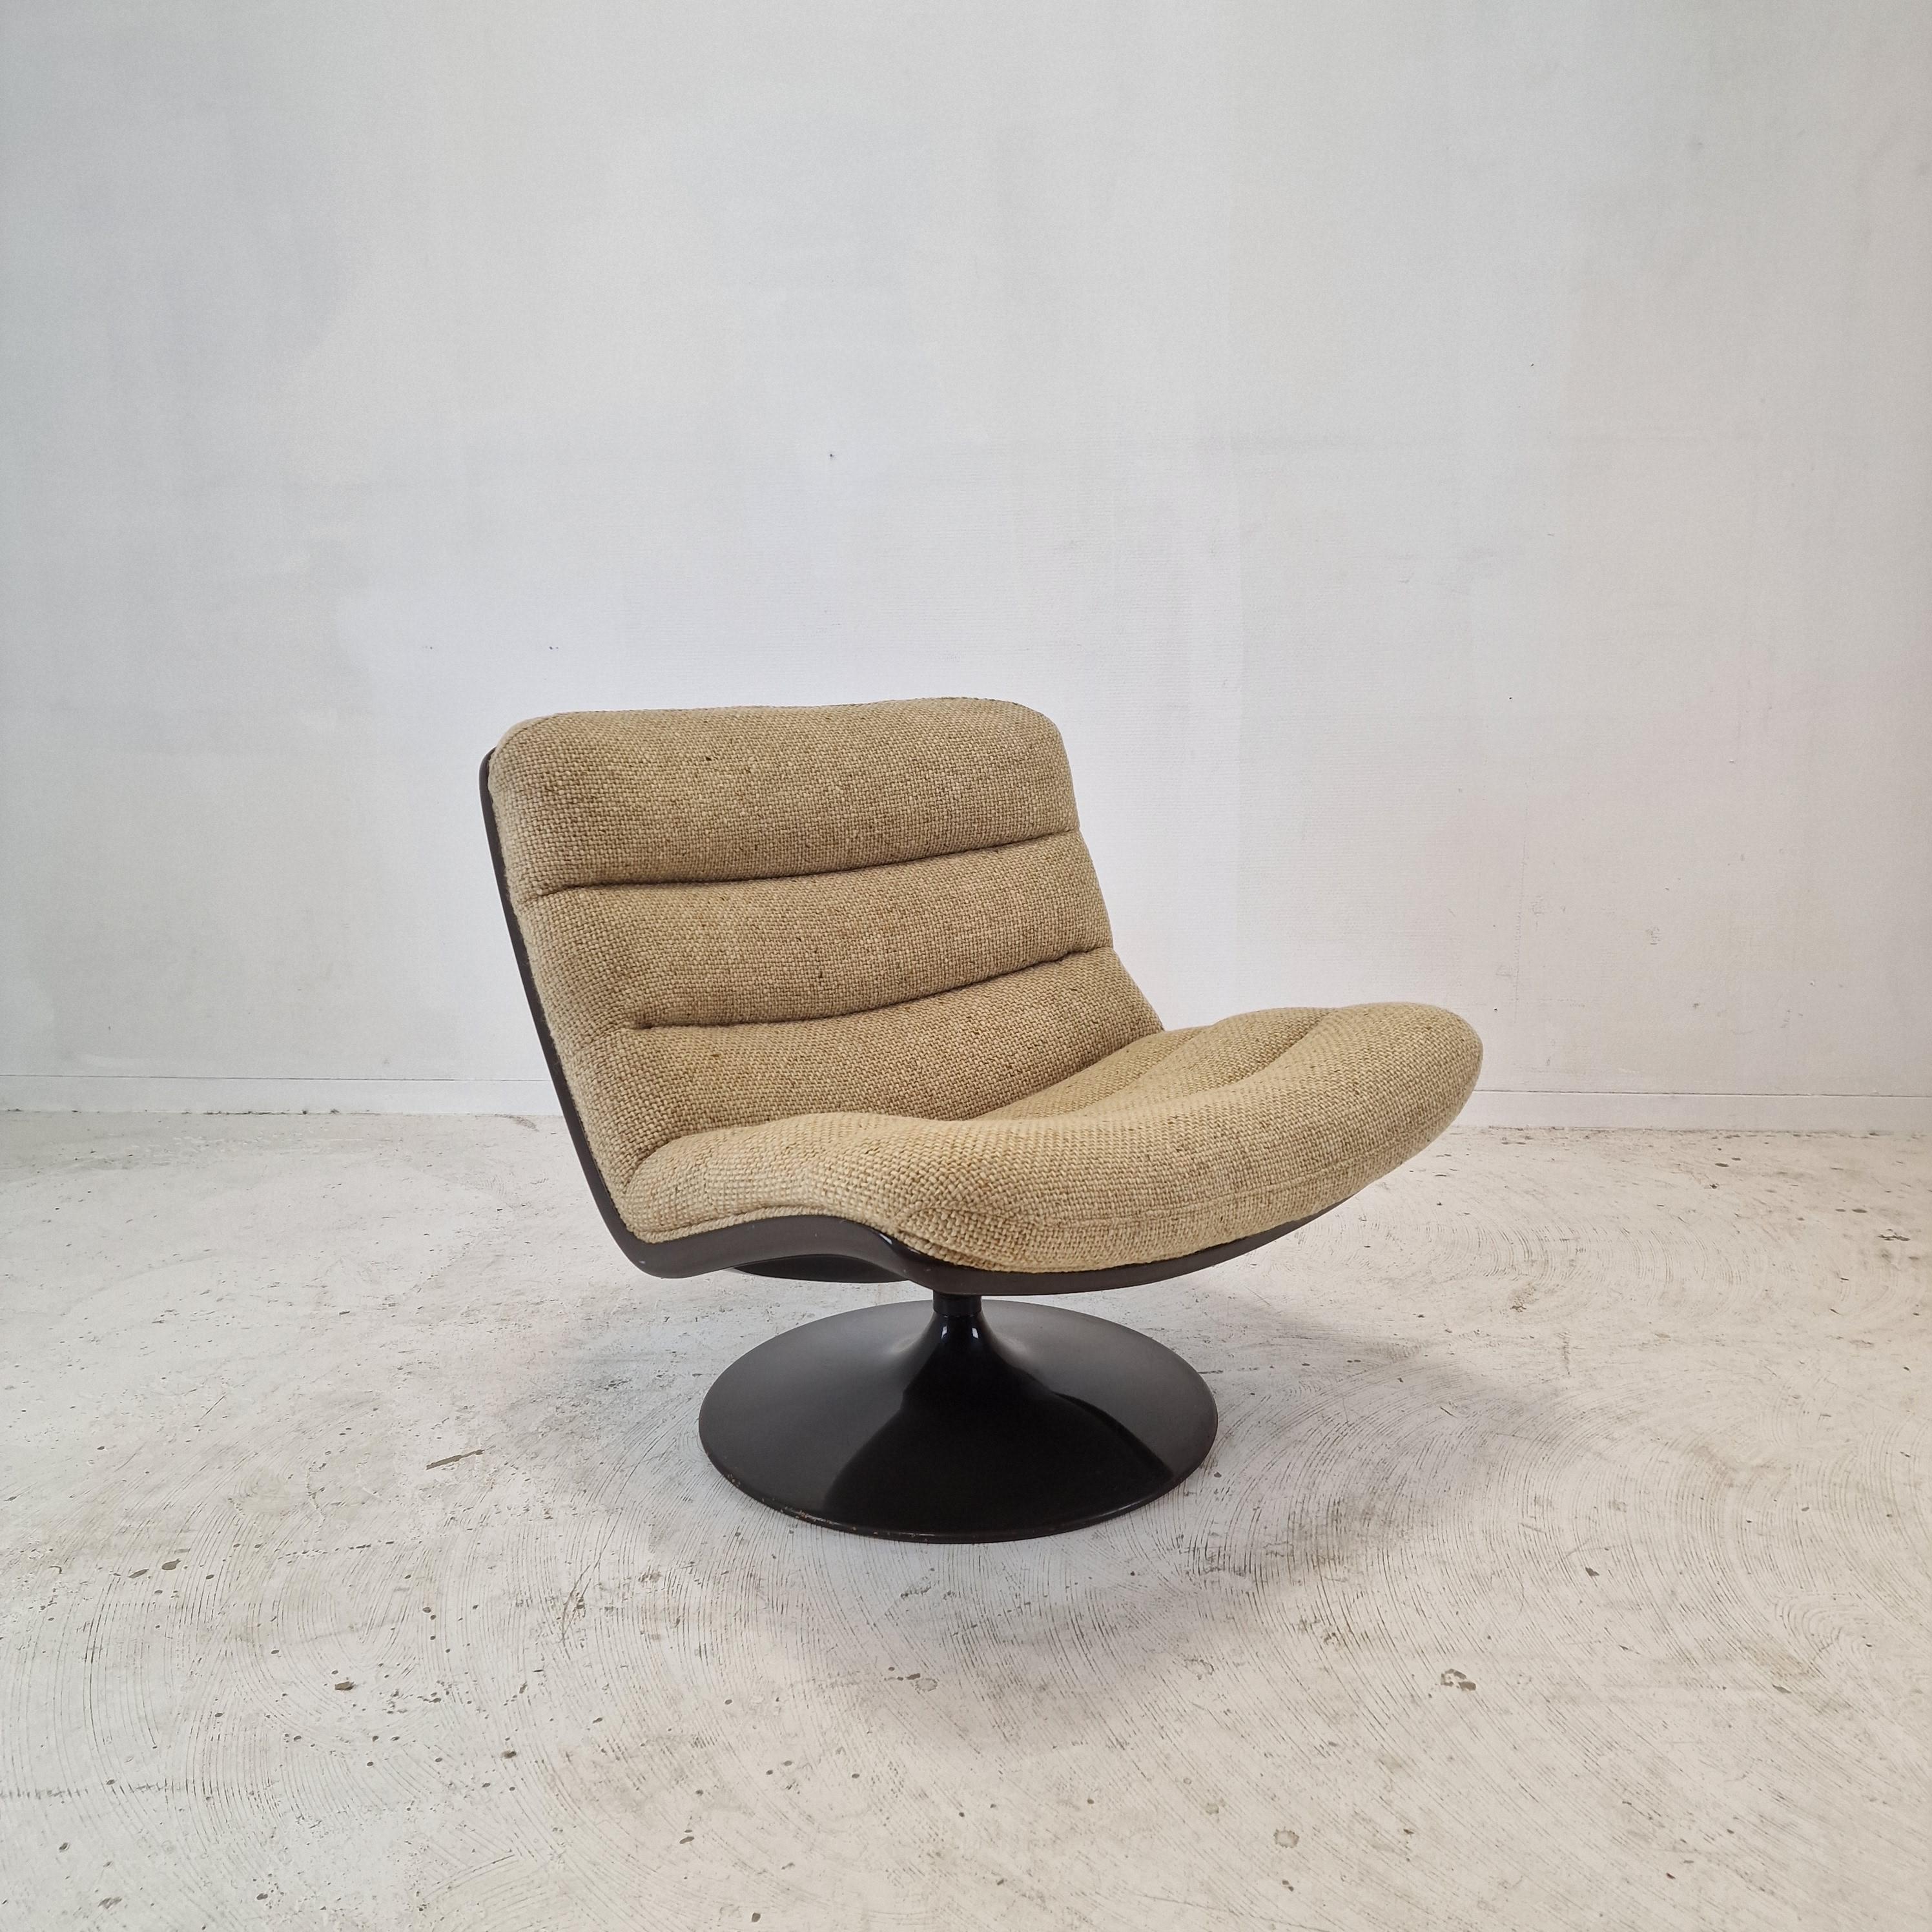 Dutch Set of 2 975 Lounge Chair by Geoffrey Harcourt for Artifort, 1970s For Sale